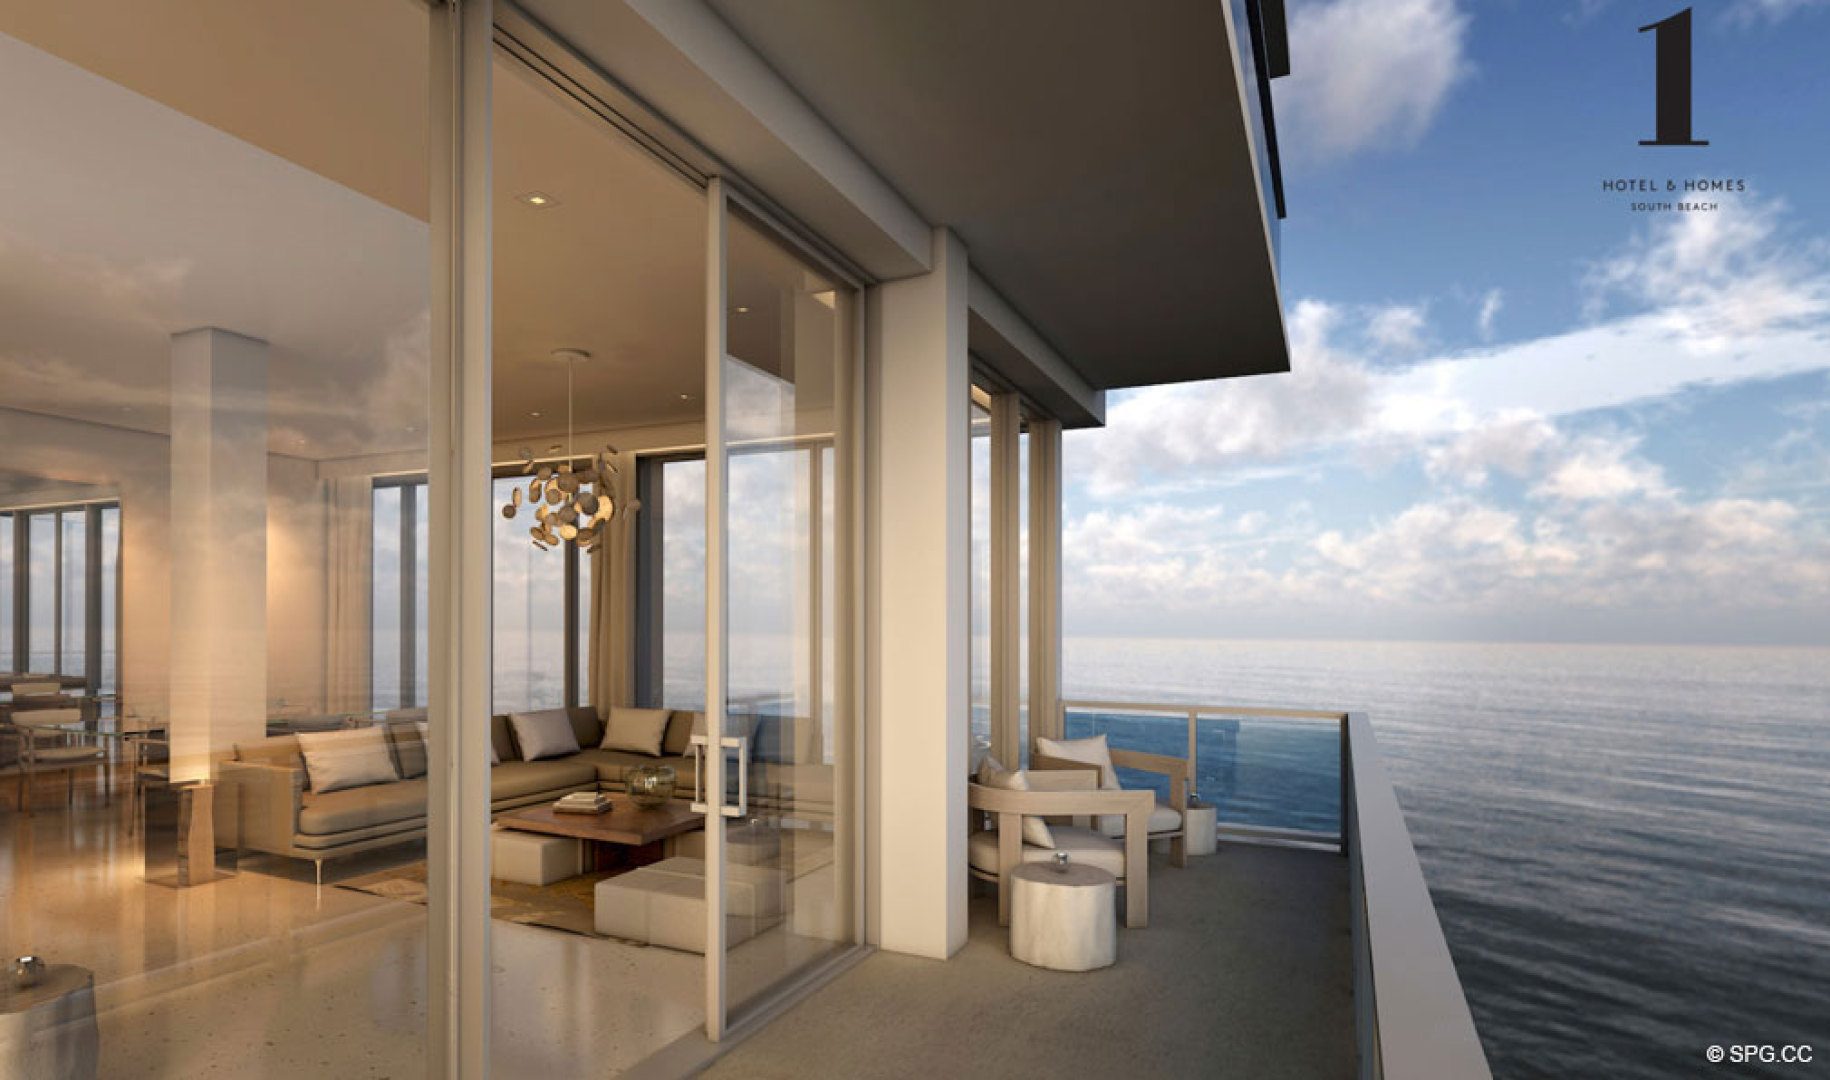 Penthouse Views at 1 Hotel & Homes South Beach, Luxury Oceanfront Condominiums Located at 2399 Collins Ave, Miami Beach, FL 33139